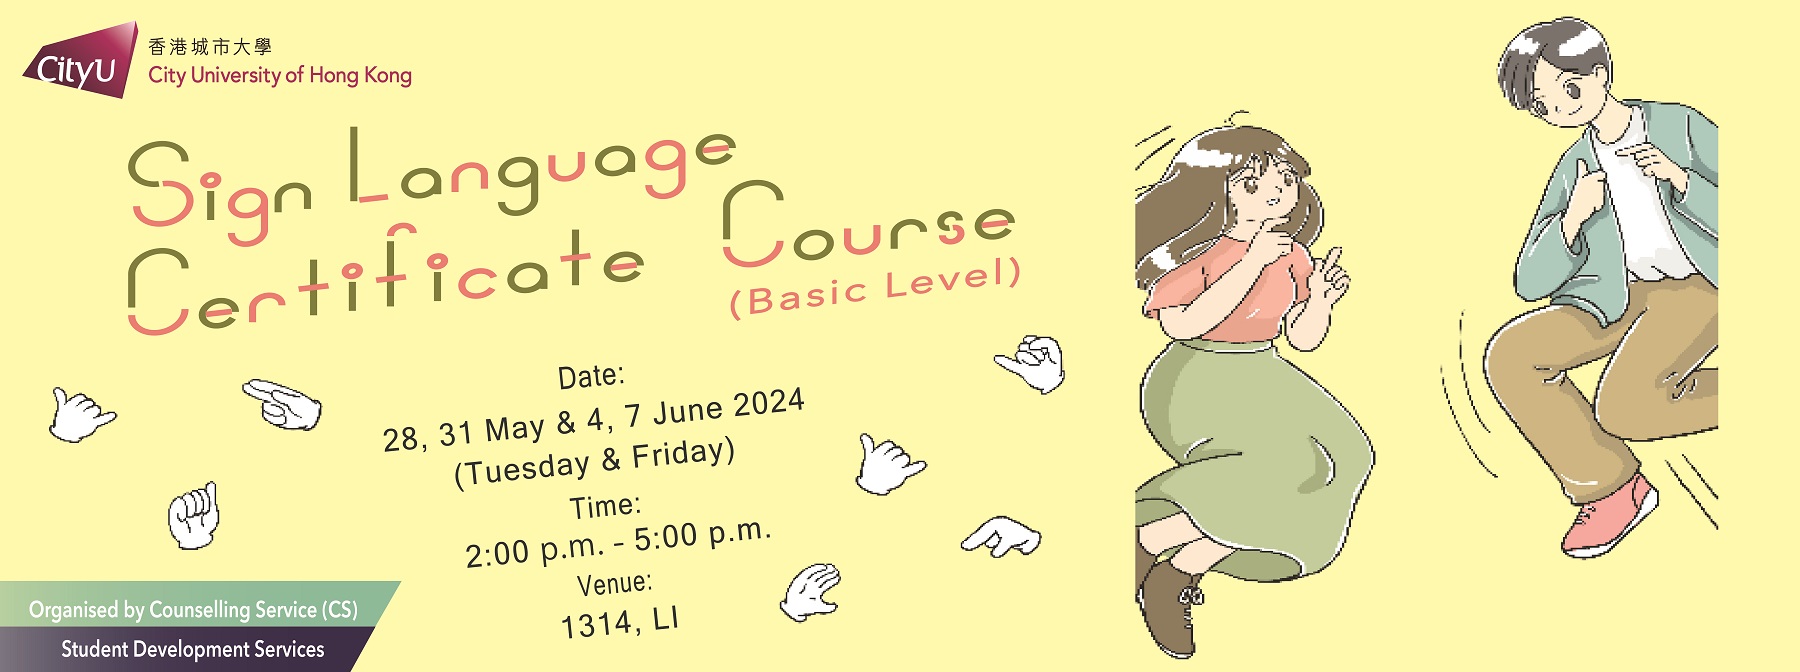 Sign Language Certificate Course (Basic Level)